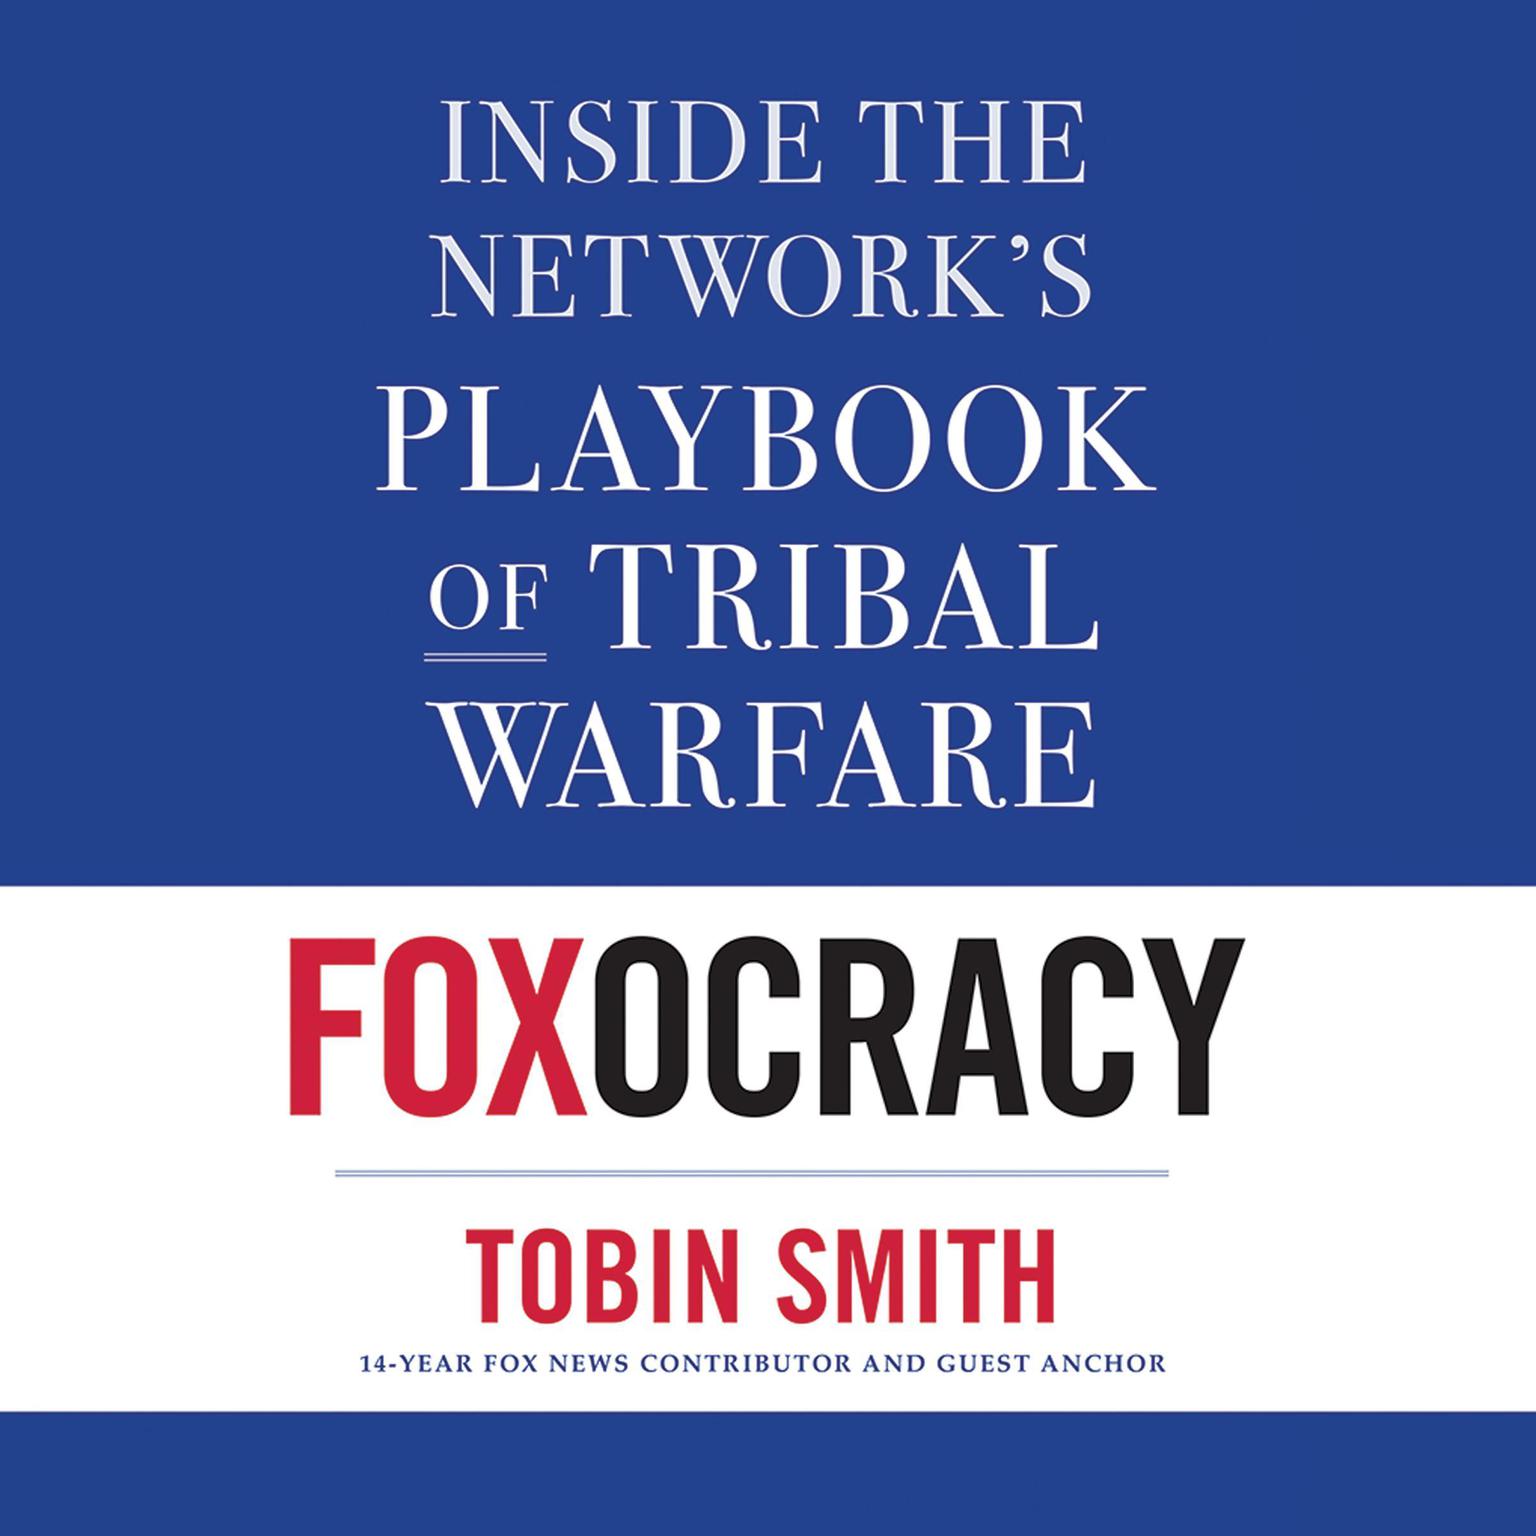 Foxocracy: Inside the Networks Playbook of Tribal Warfare Audiobook, by Tobin Smith